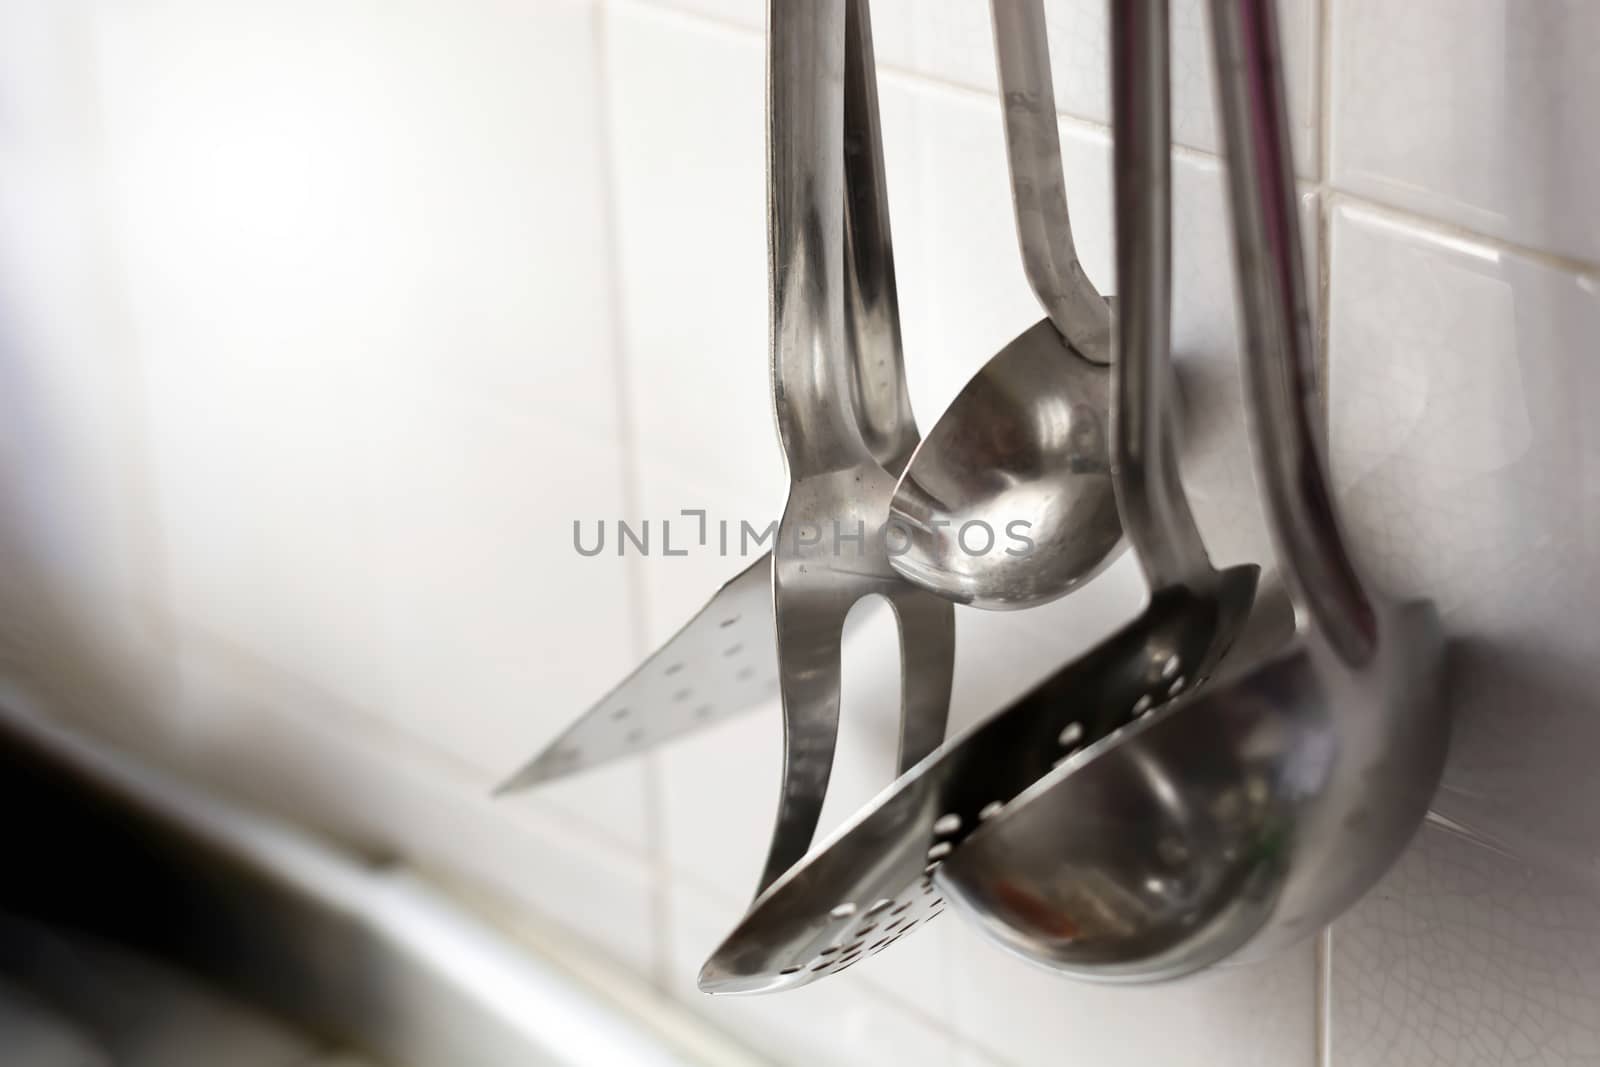 A skimmer, two forks and two metal ladles hanging on the tiled kitchen wall. Metal kitchen utensils